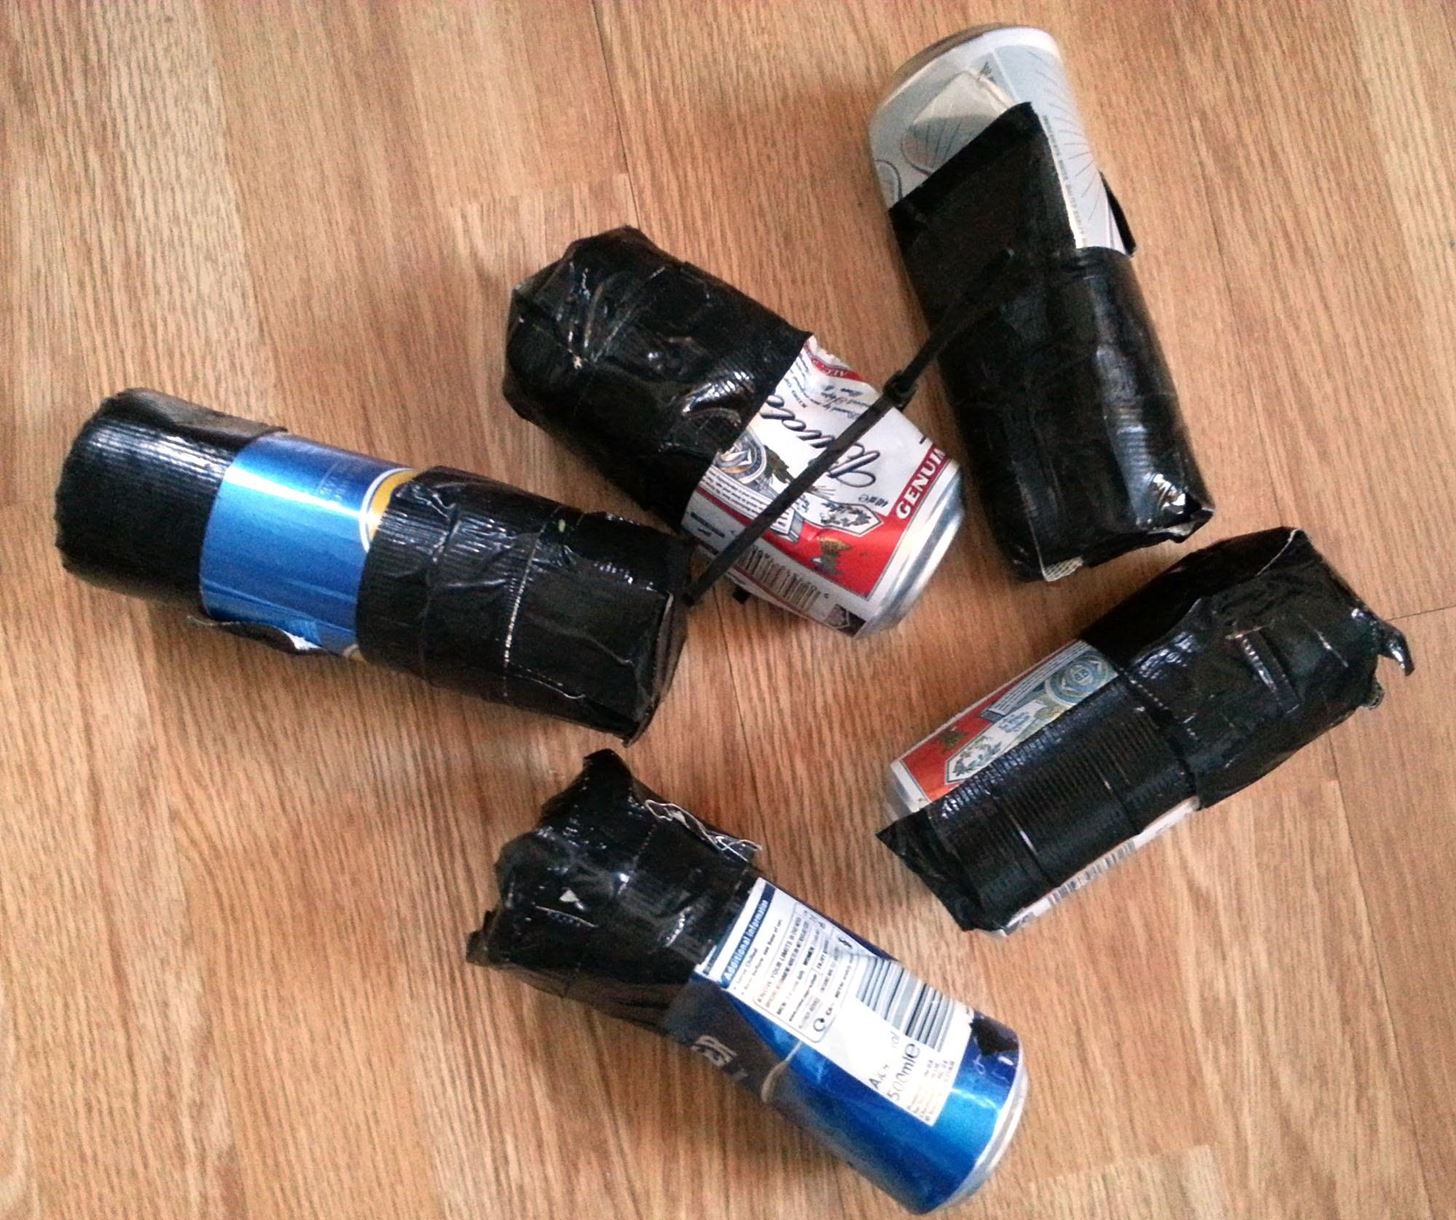 How to Take Long-Term Pinhole Exposures Using a Beer Can Camera